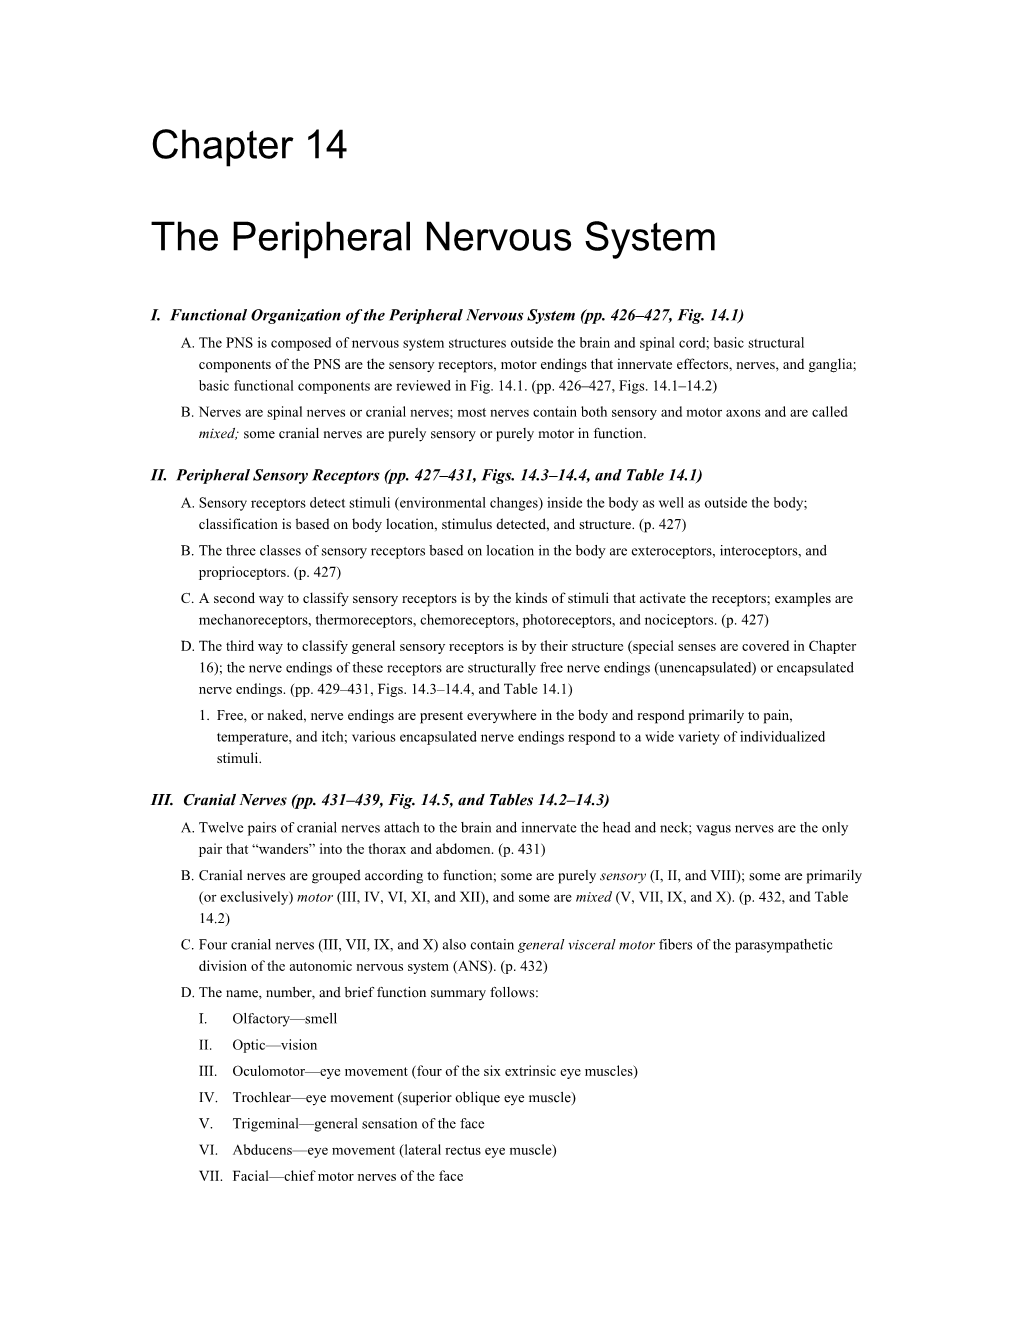 I. Functional Organization of the Peripheral Nervous System (Pp. 426 427, Fig. 14.1)